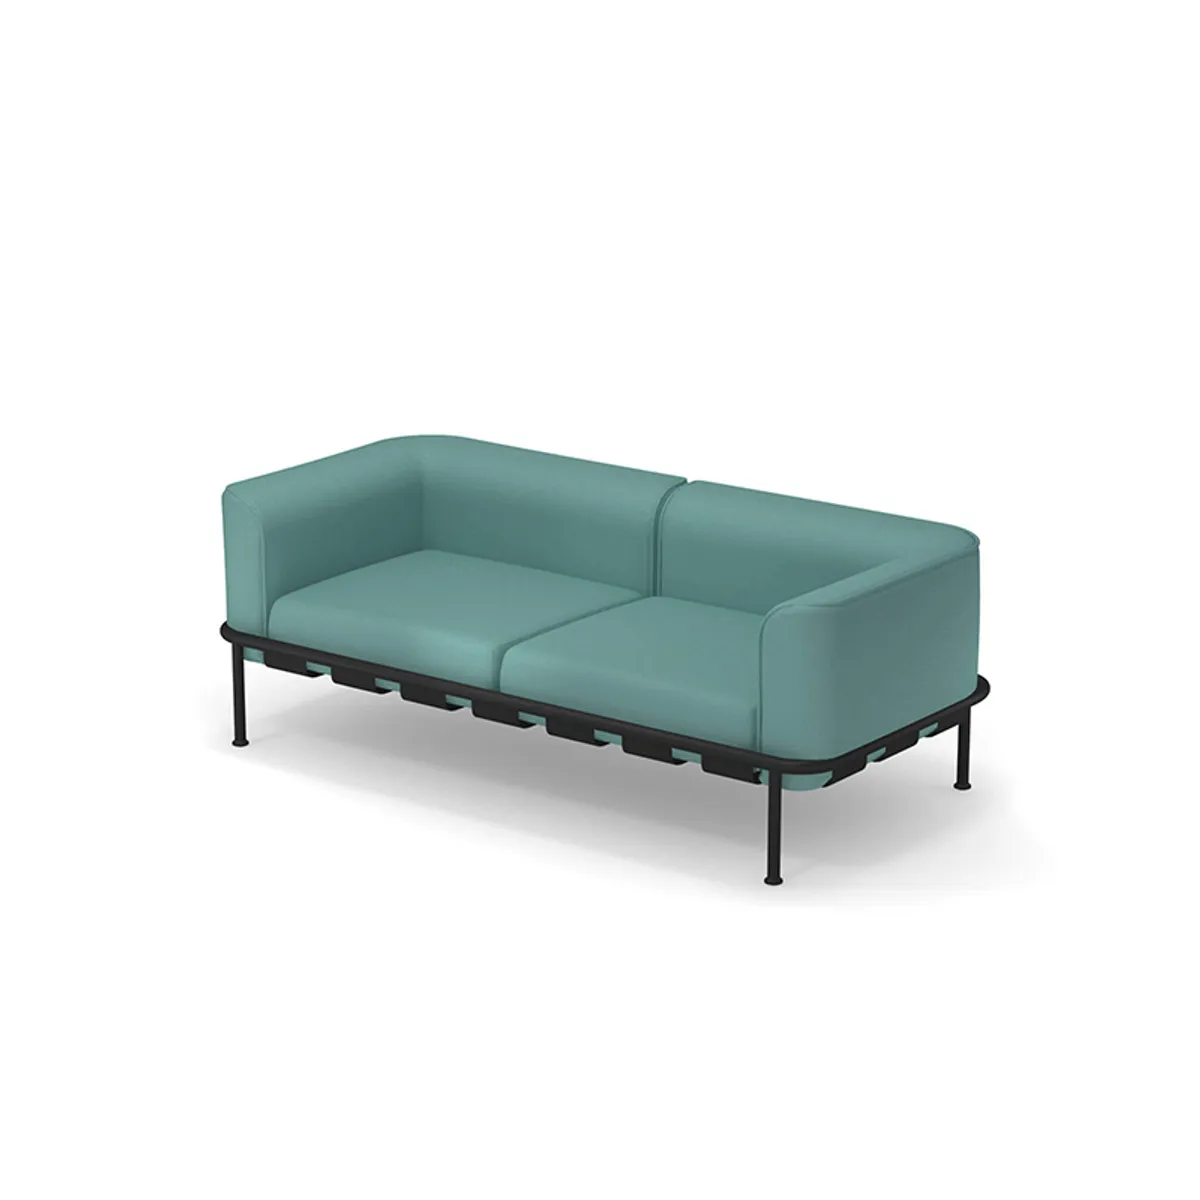 Dock 2 Seater Sofa 24 2 Outdoor Use Inside Out Contracst